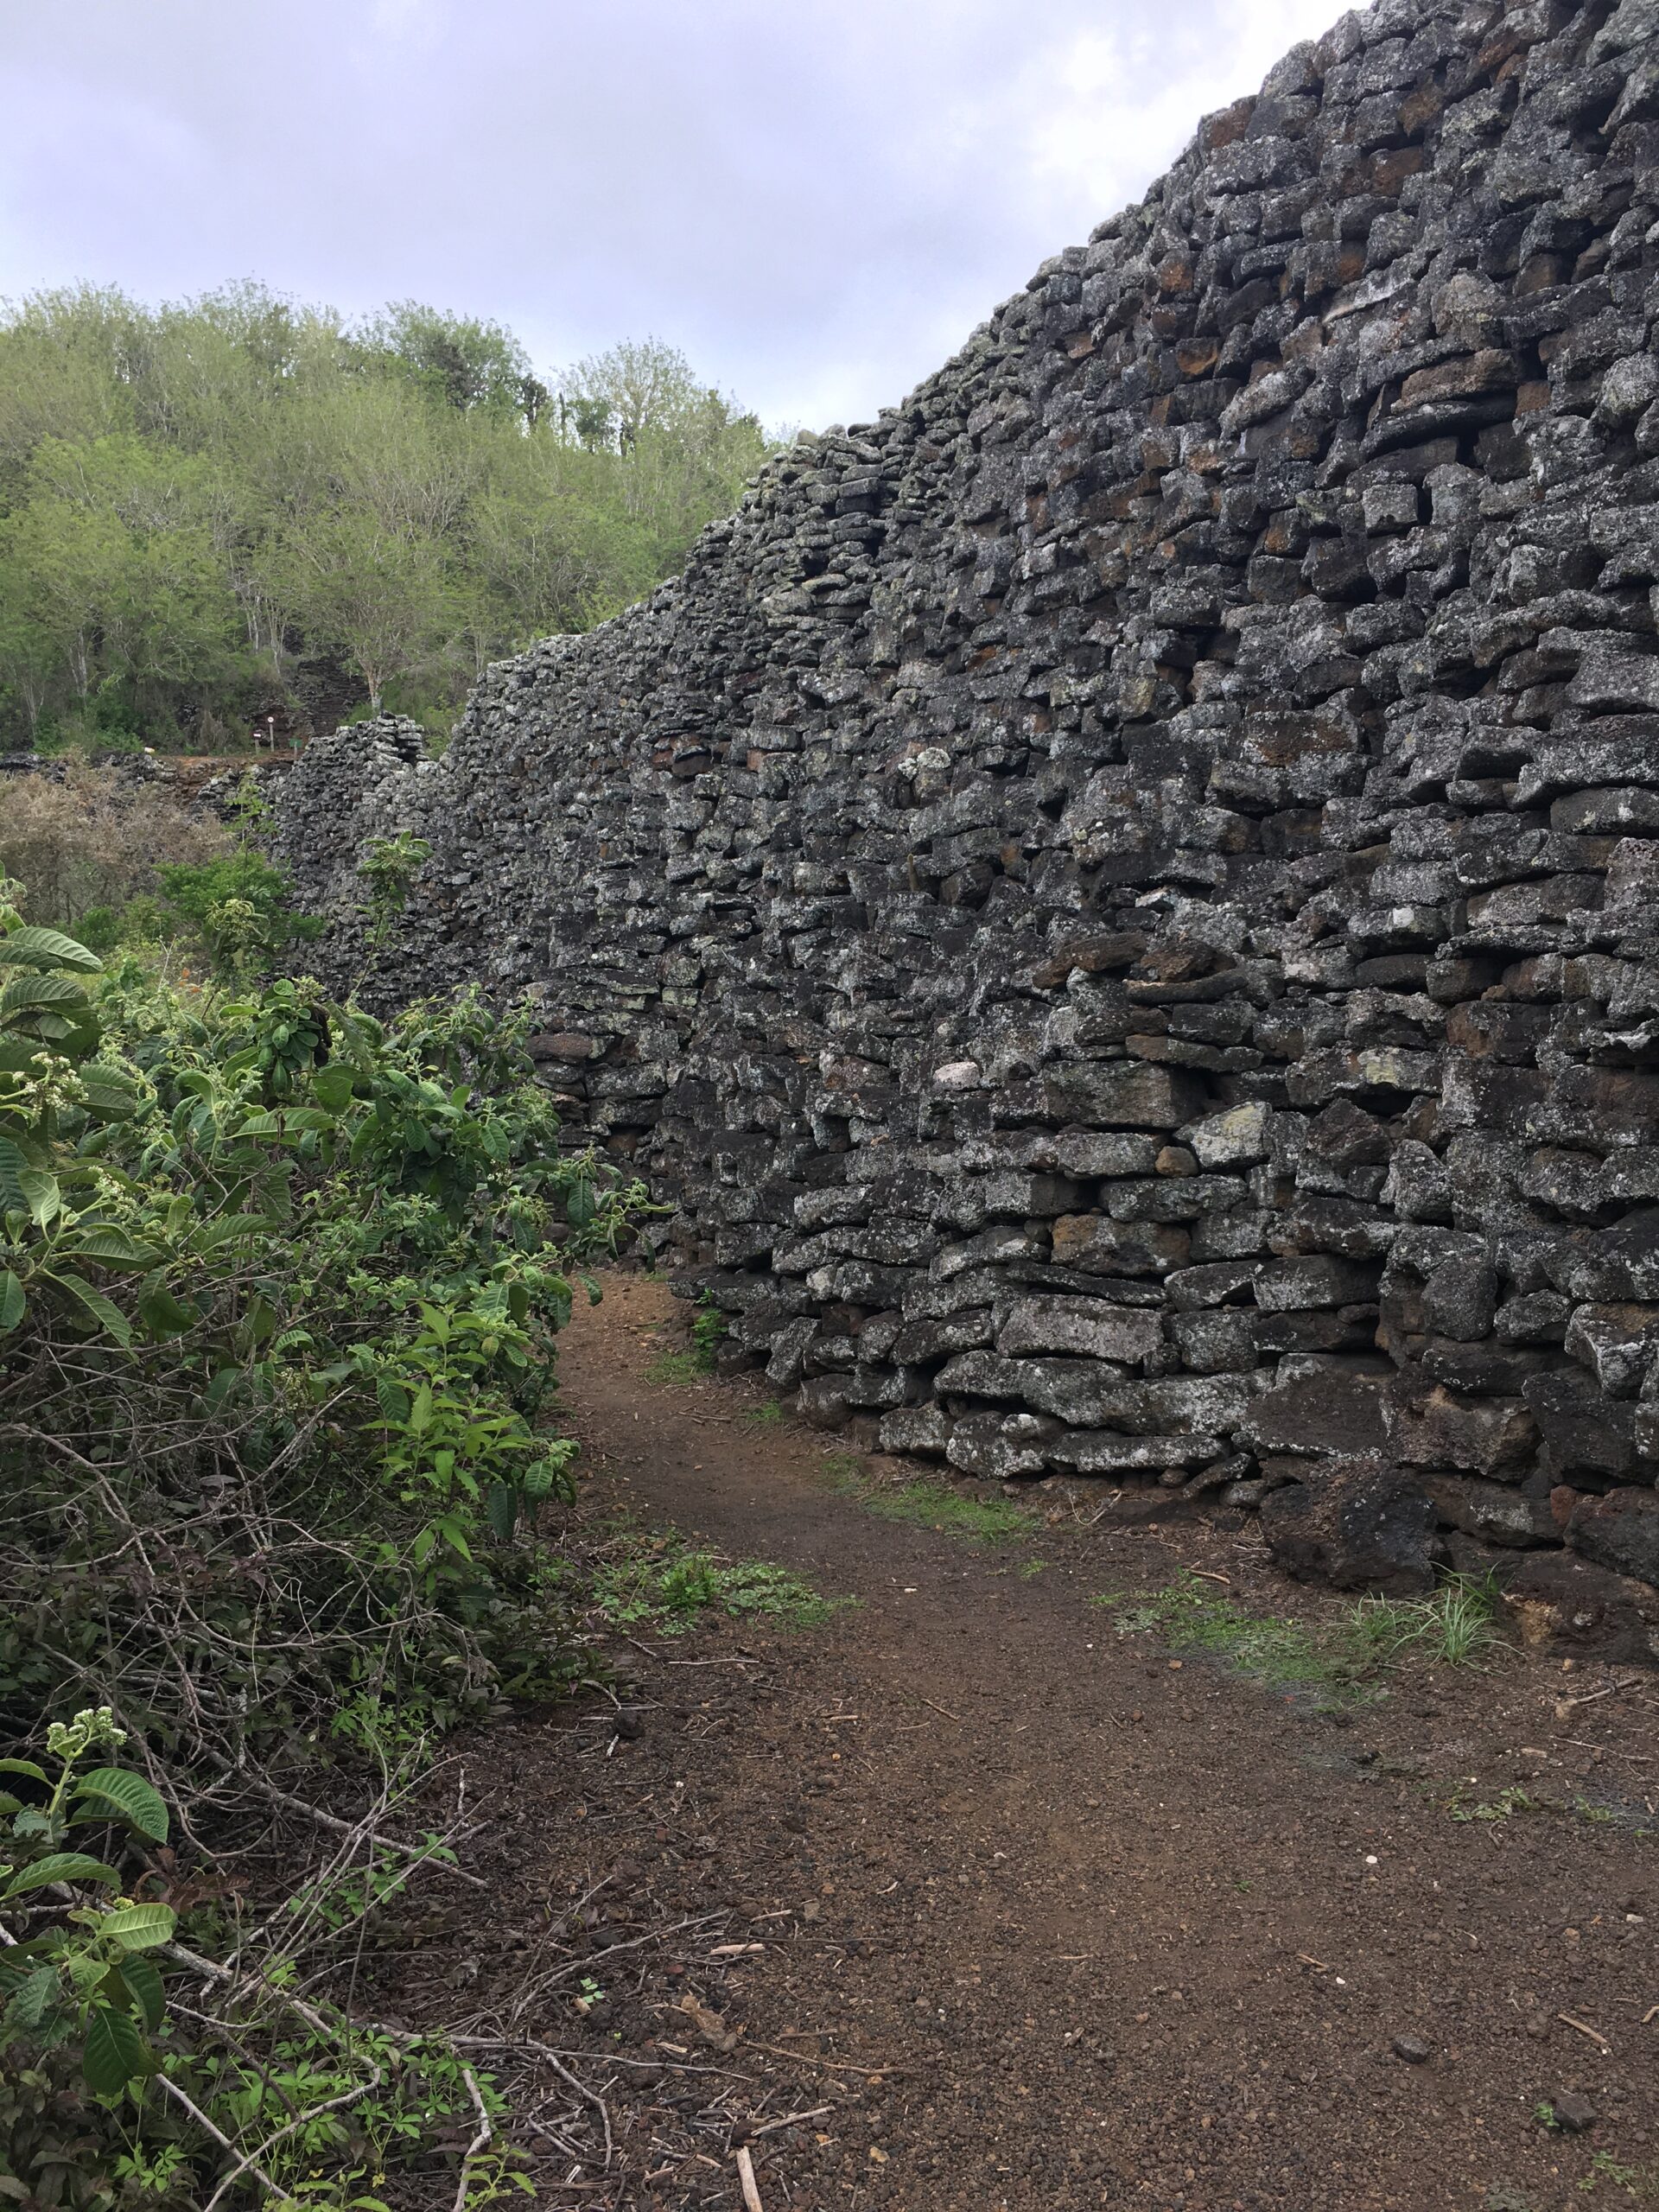 Pictured is El Muro de las Lágrimas. The wall is made out of grey-black stone and continues horizontally until exceeding past the photo limitations. 